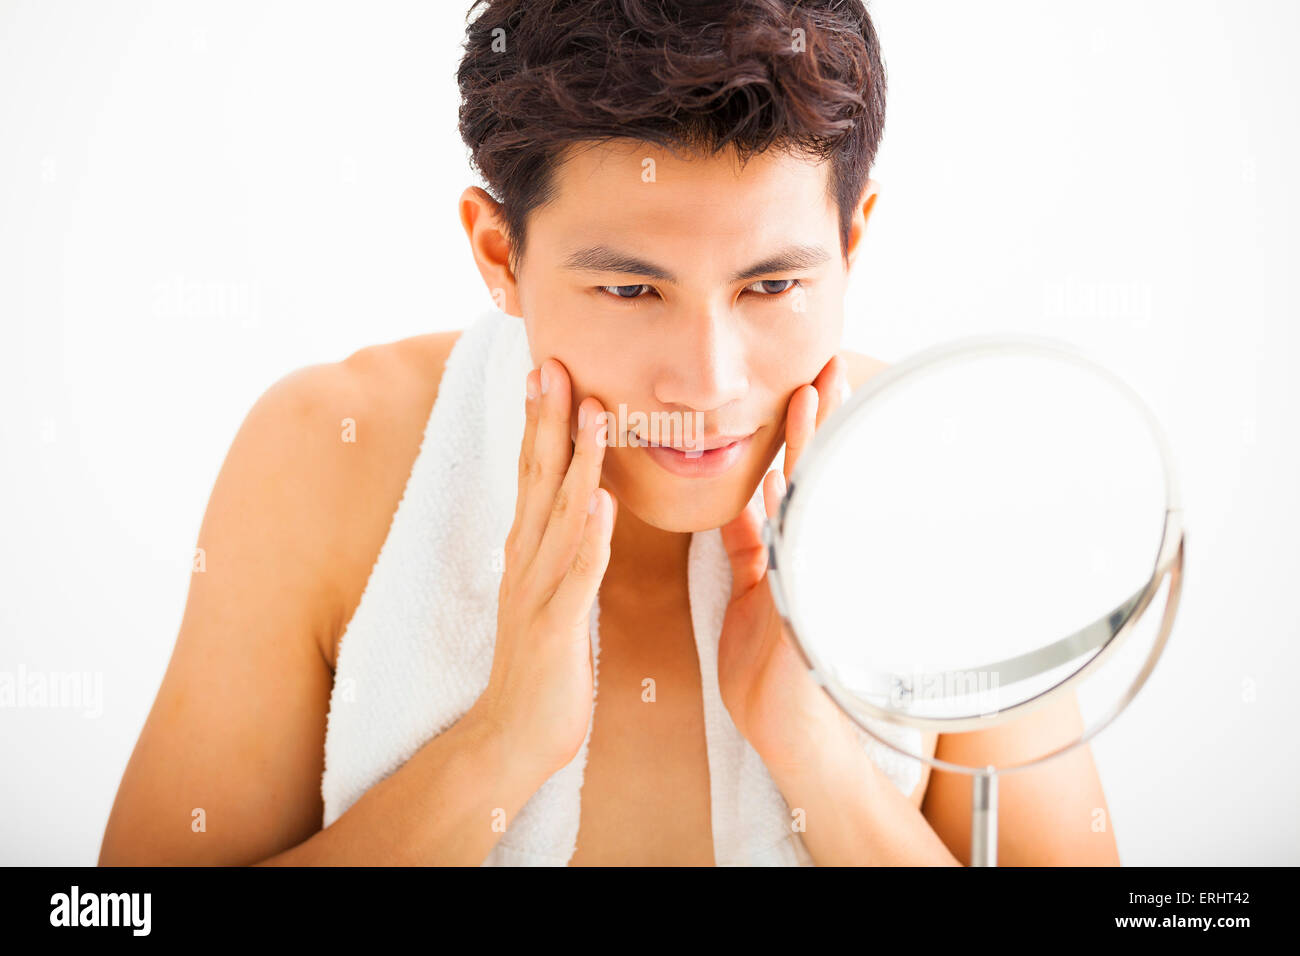 Young  man touching his smooth face after shaving Stock Photo